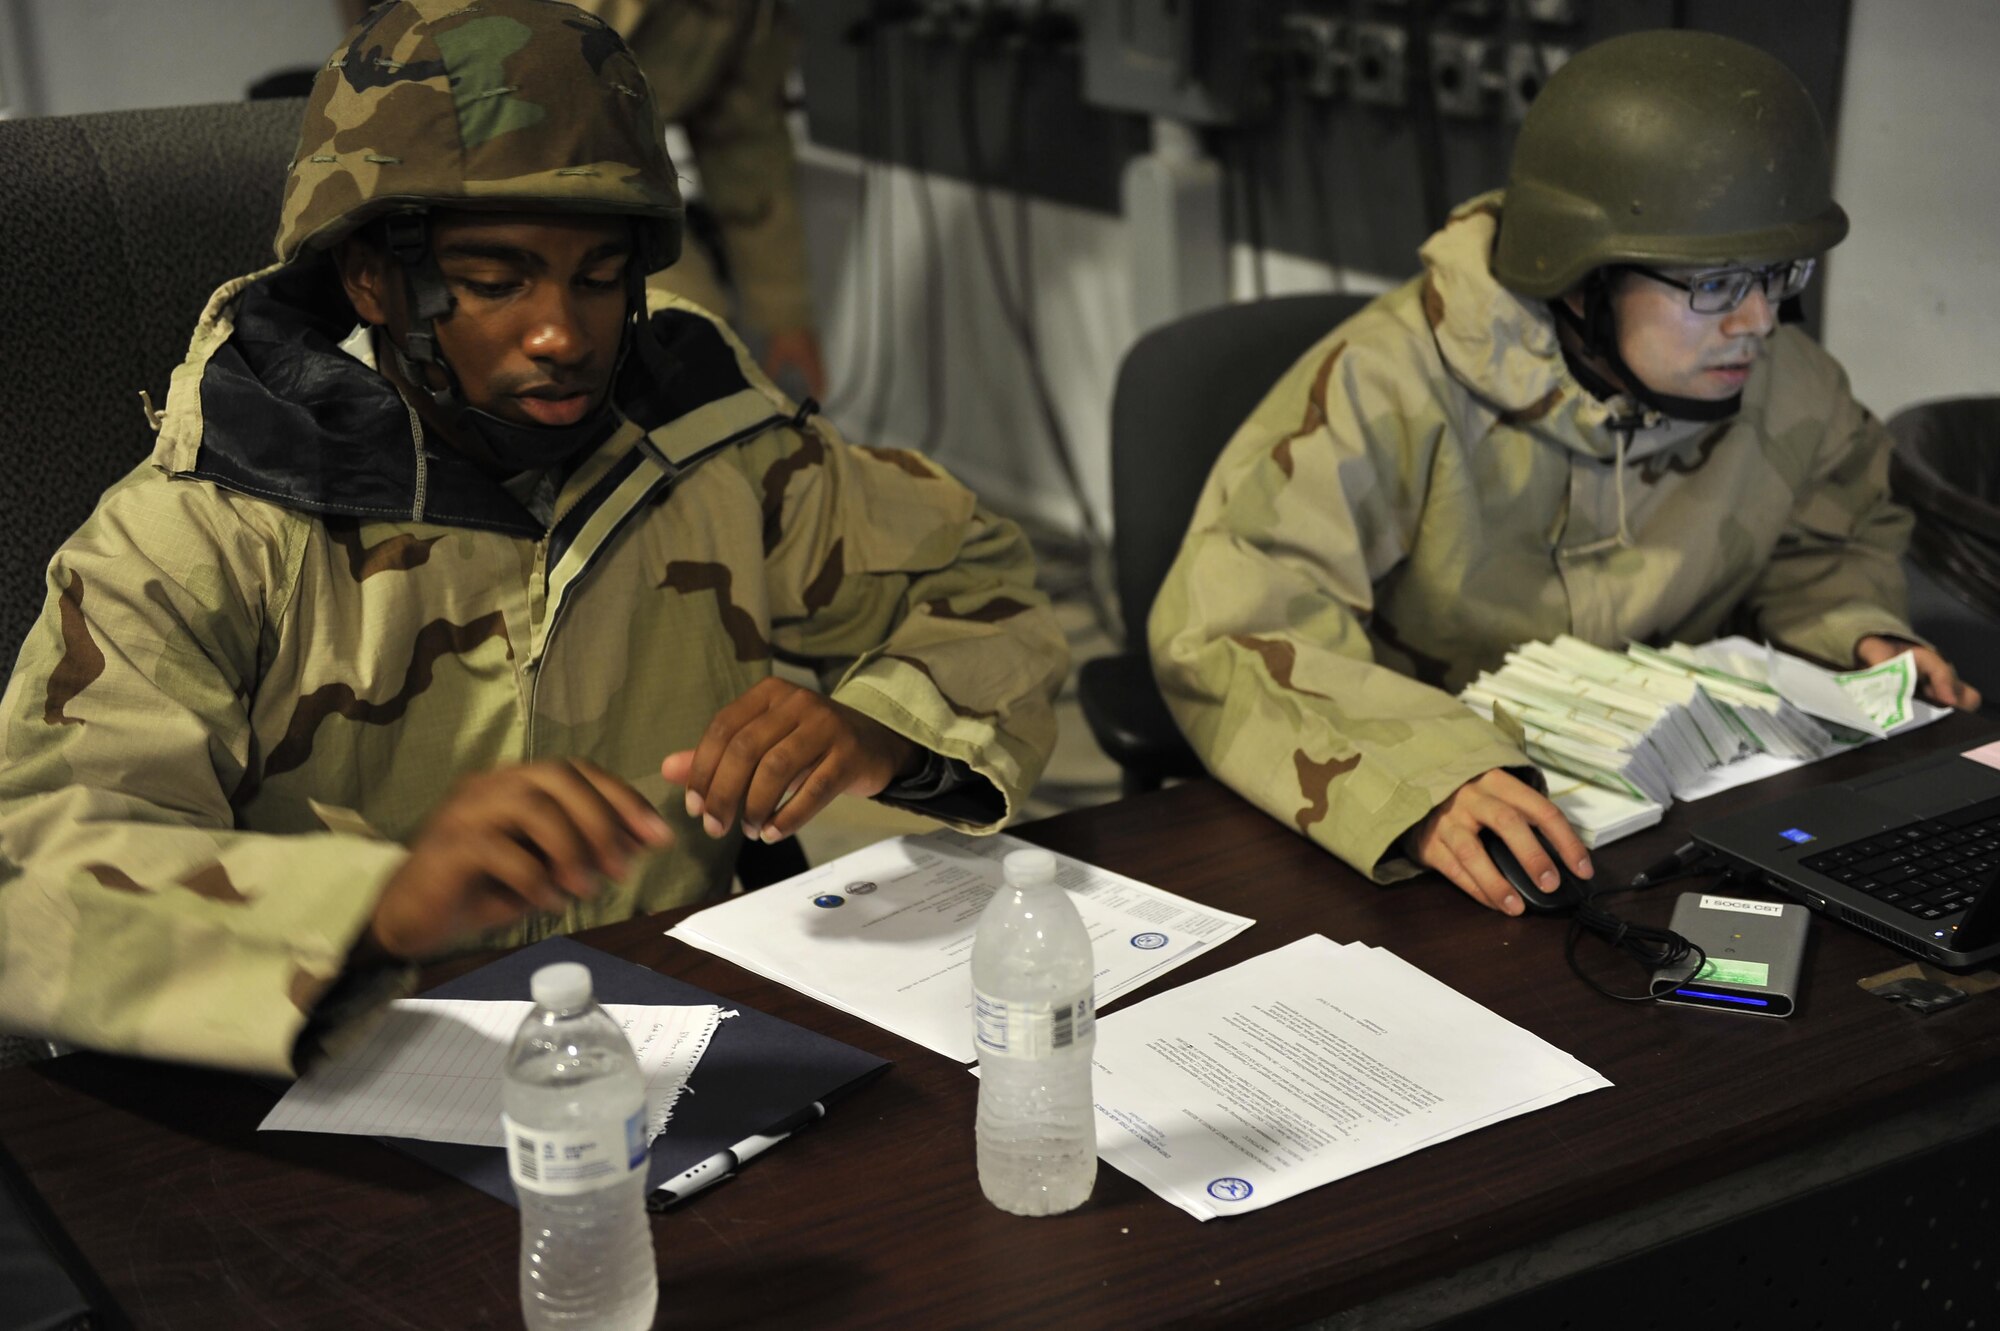 Senior Airman Jonathan Chapman and Staff Sgt. Joshua Reber, assigned to the 1st Special Operations Comptroller Squadron, count ‘cash’ and review the end of day cash accountability during the Financial Management Warrior expeditionary exercise on Hurlburt Field, Fla., June 6, 2015. The training is based on ‘Top Dollar,’ a finance exercise from the 1990’s, and is anticipated to become an annual or semi-annual training event for Eglin and Hurlburt Airmen. (U.S. Air Force photo/Amn Kai White)